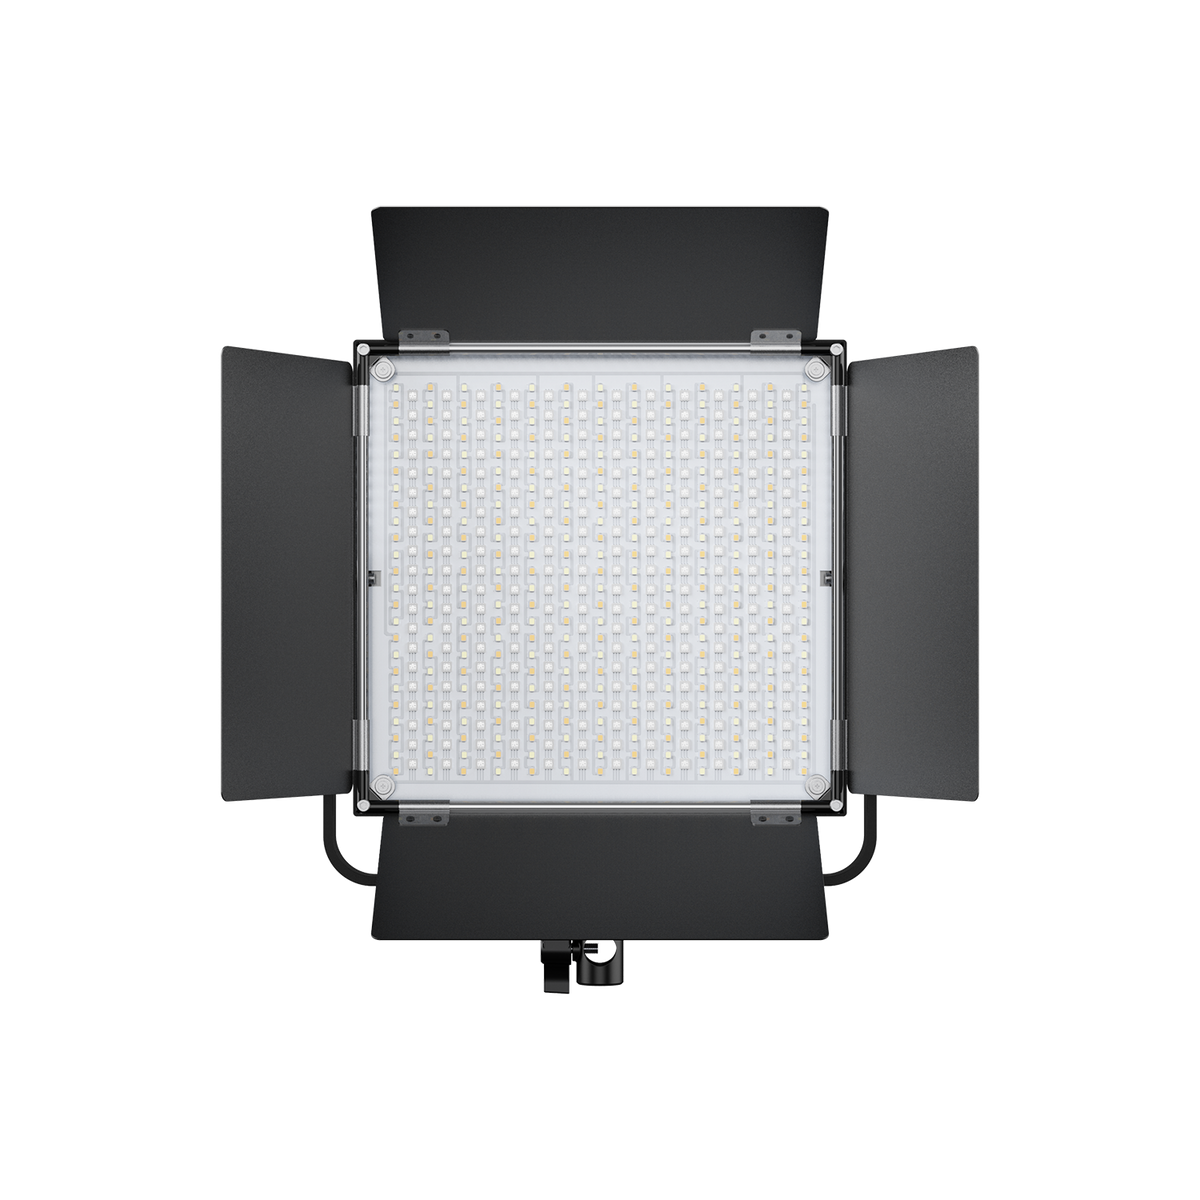 IVISII RGB LED Video Photography Light – ivisii